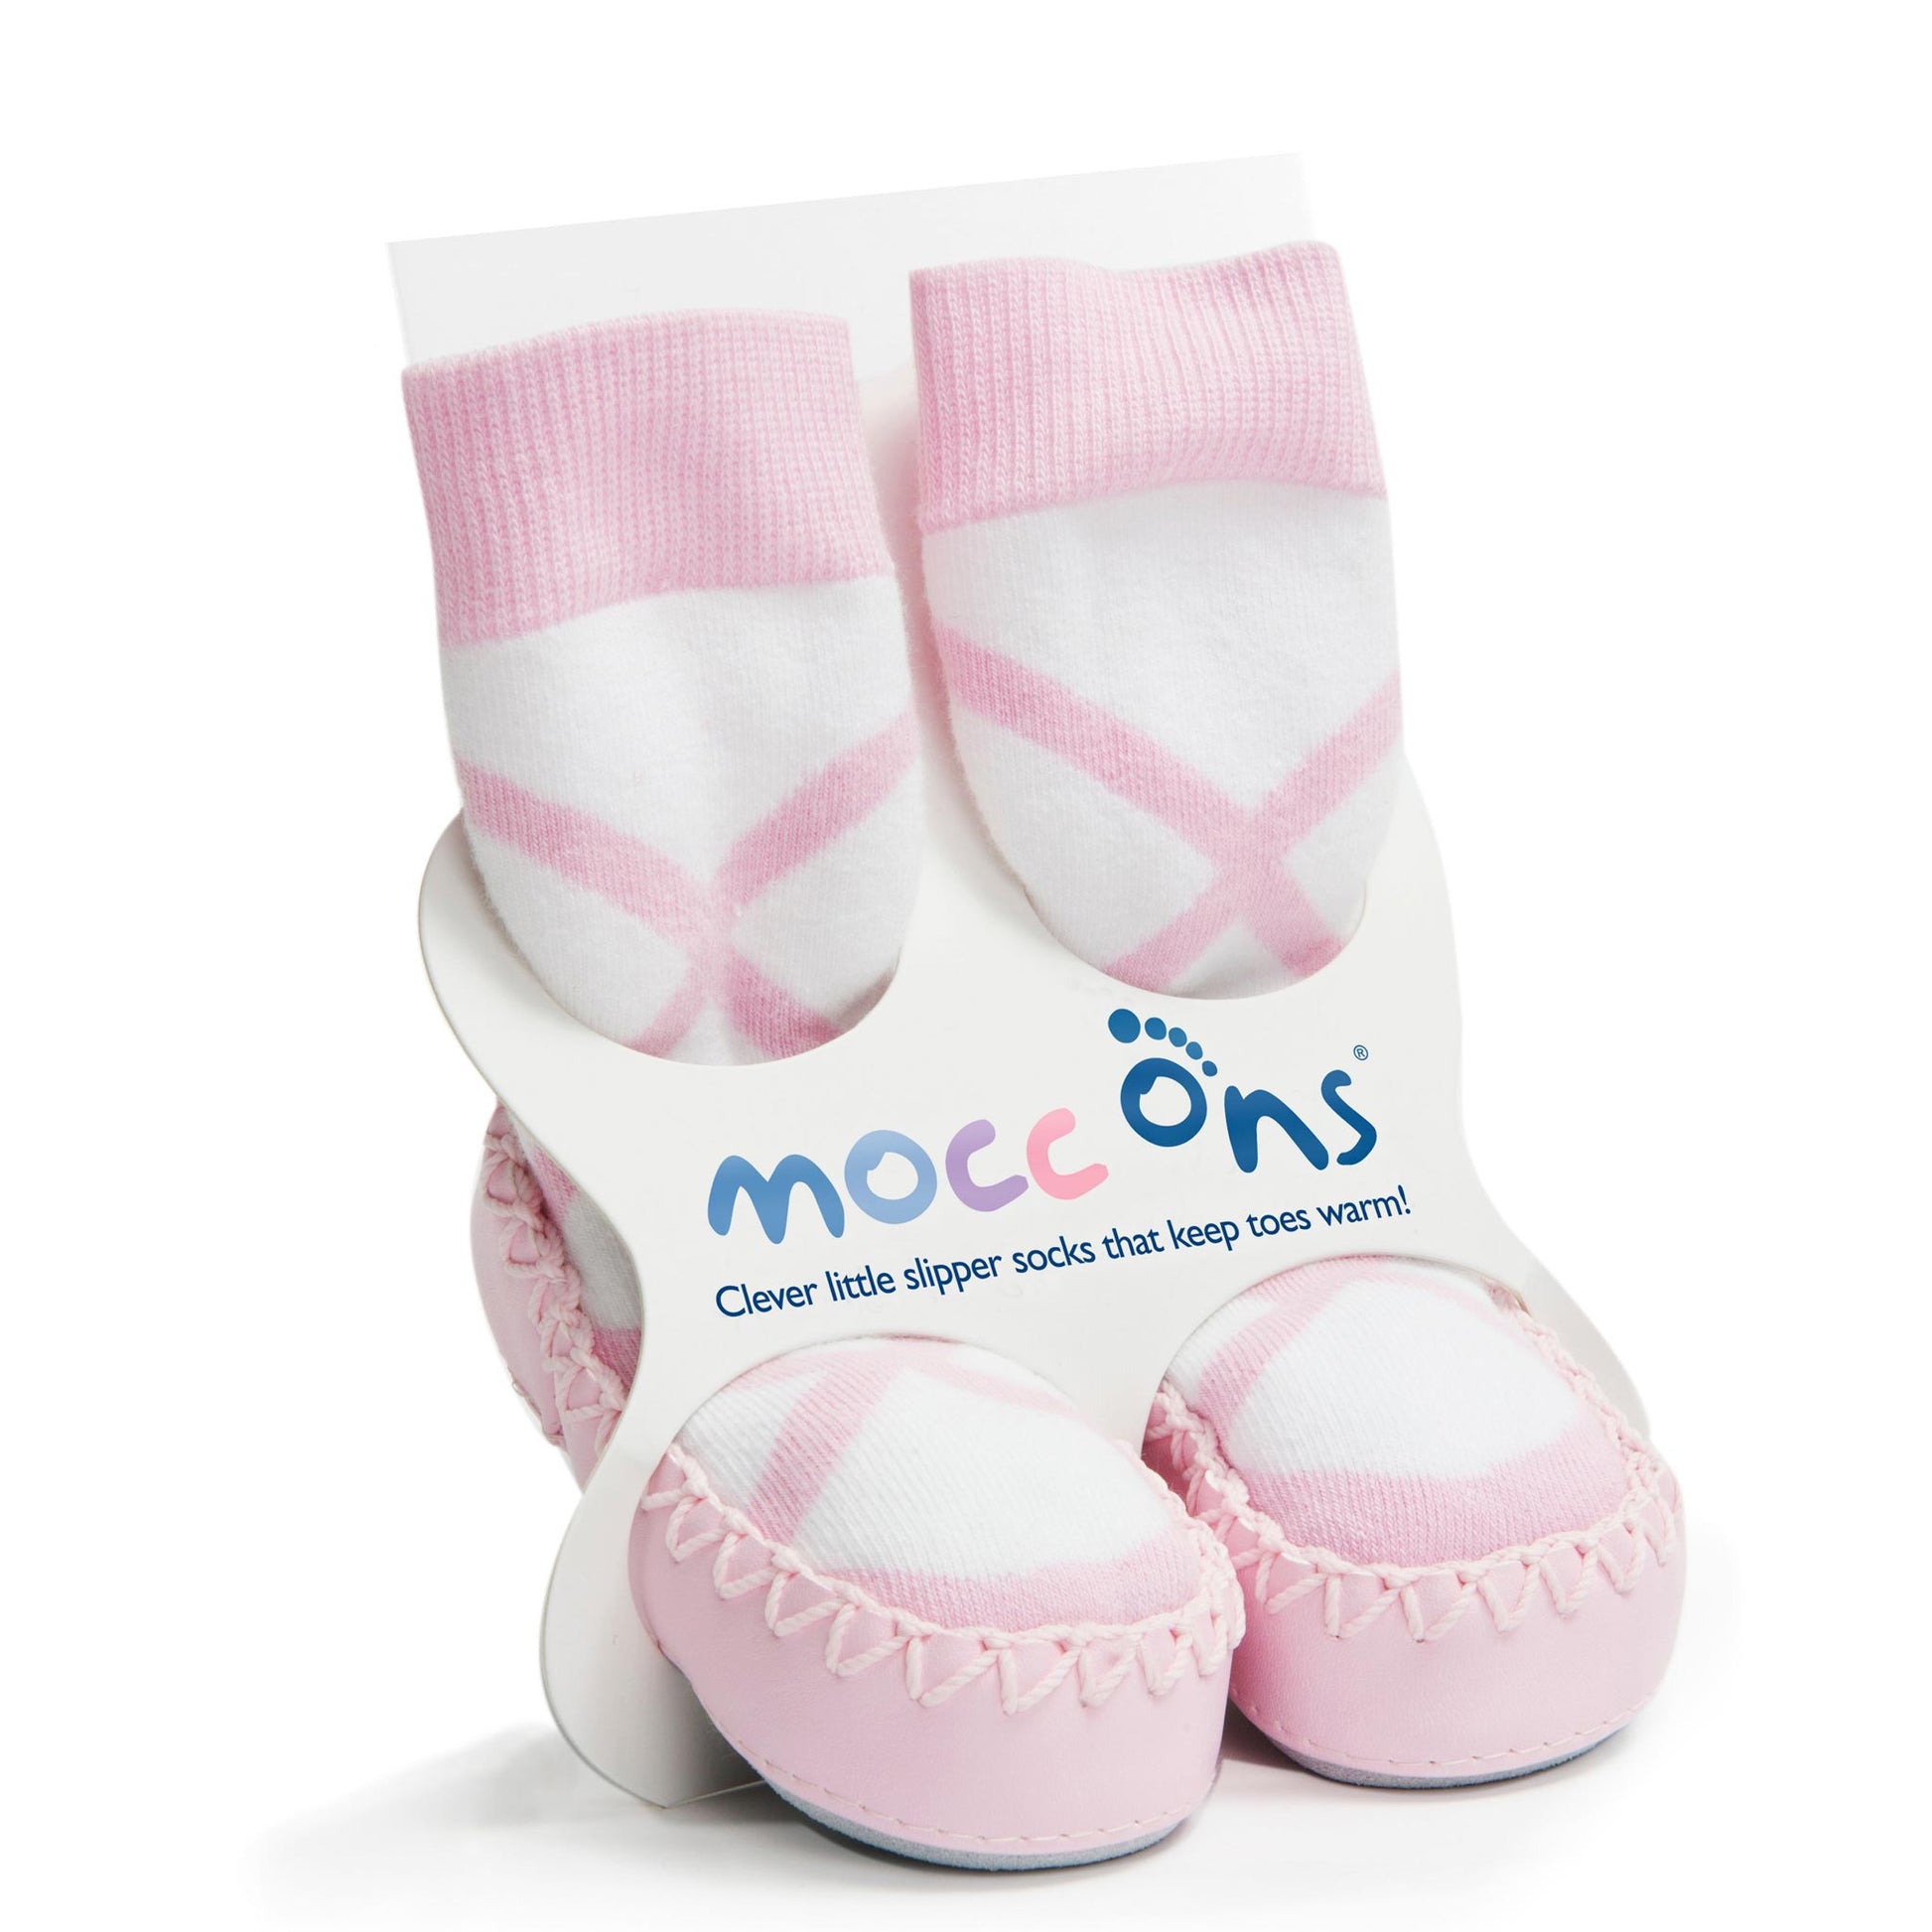 Mocc ons are moccasin style slipper socks that ensure babies and toddlers have warm and comfortable feet throughout the year.